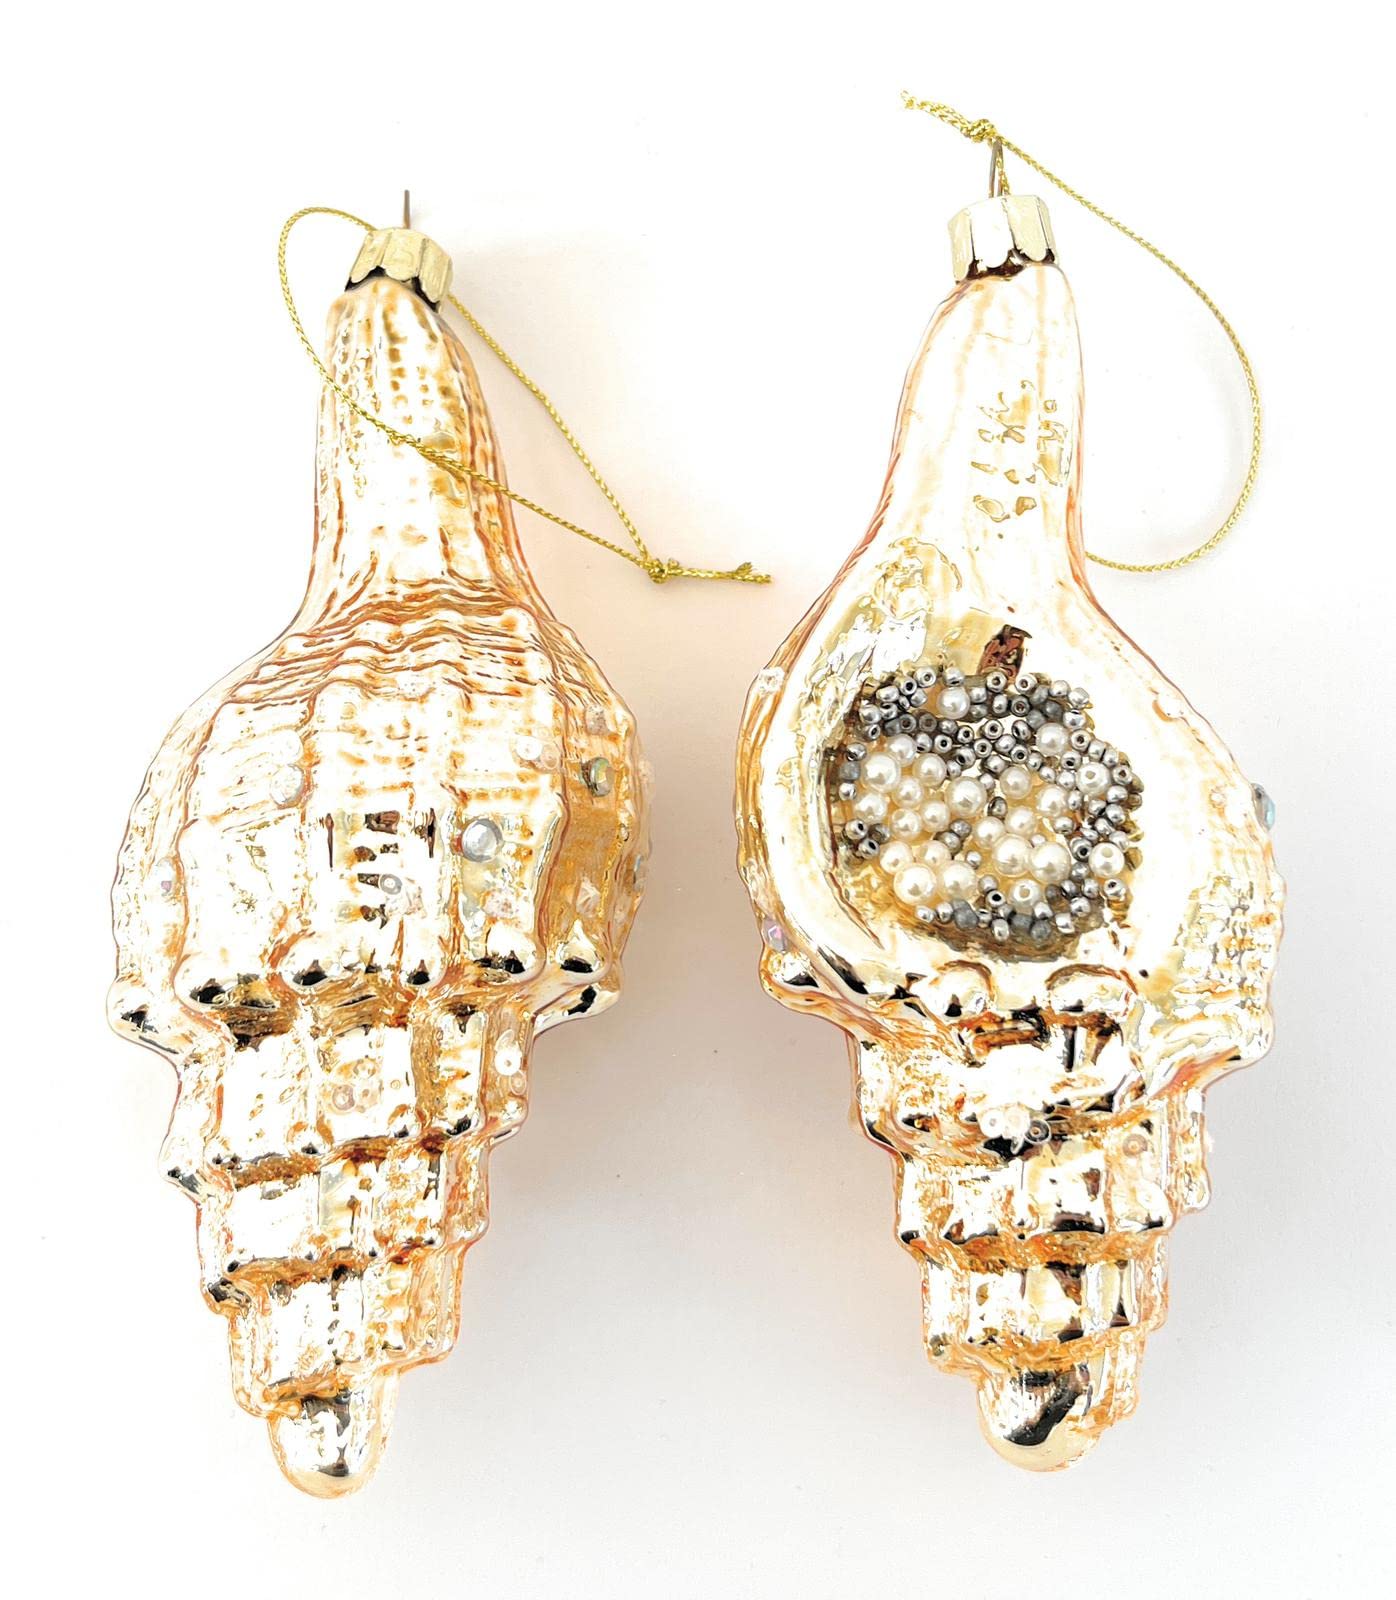 Set 2 Cornucopias - Christmas decorations - (gold and mother of pearl colors)